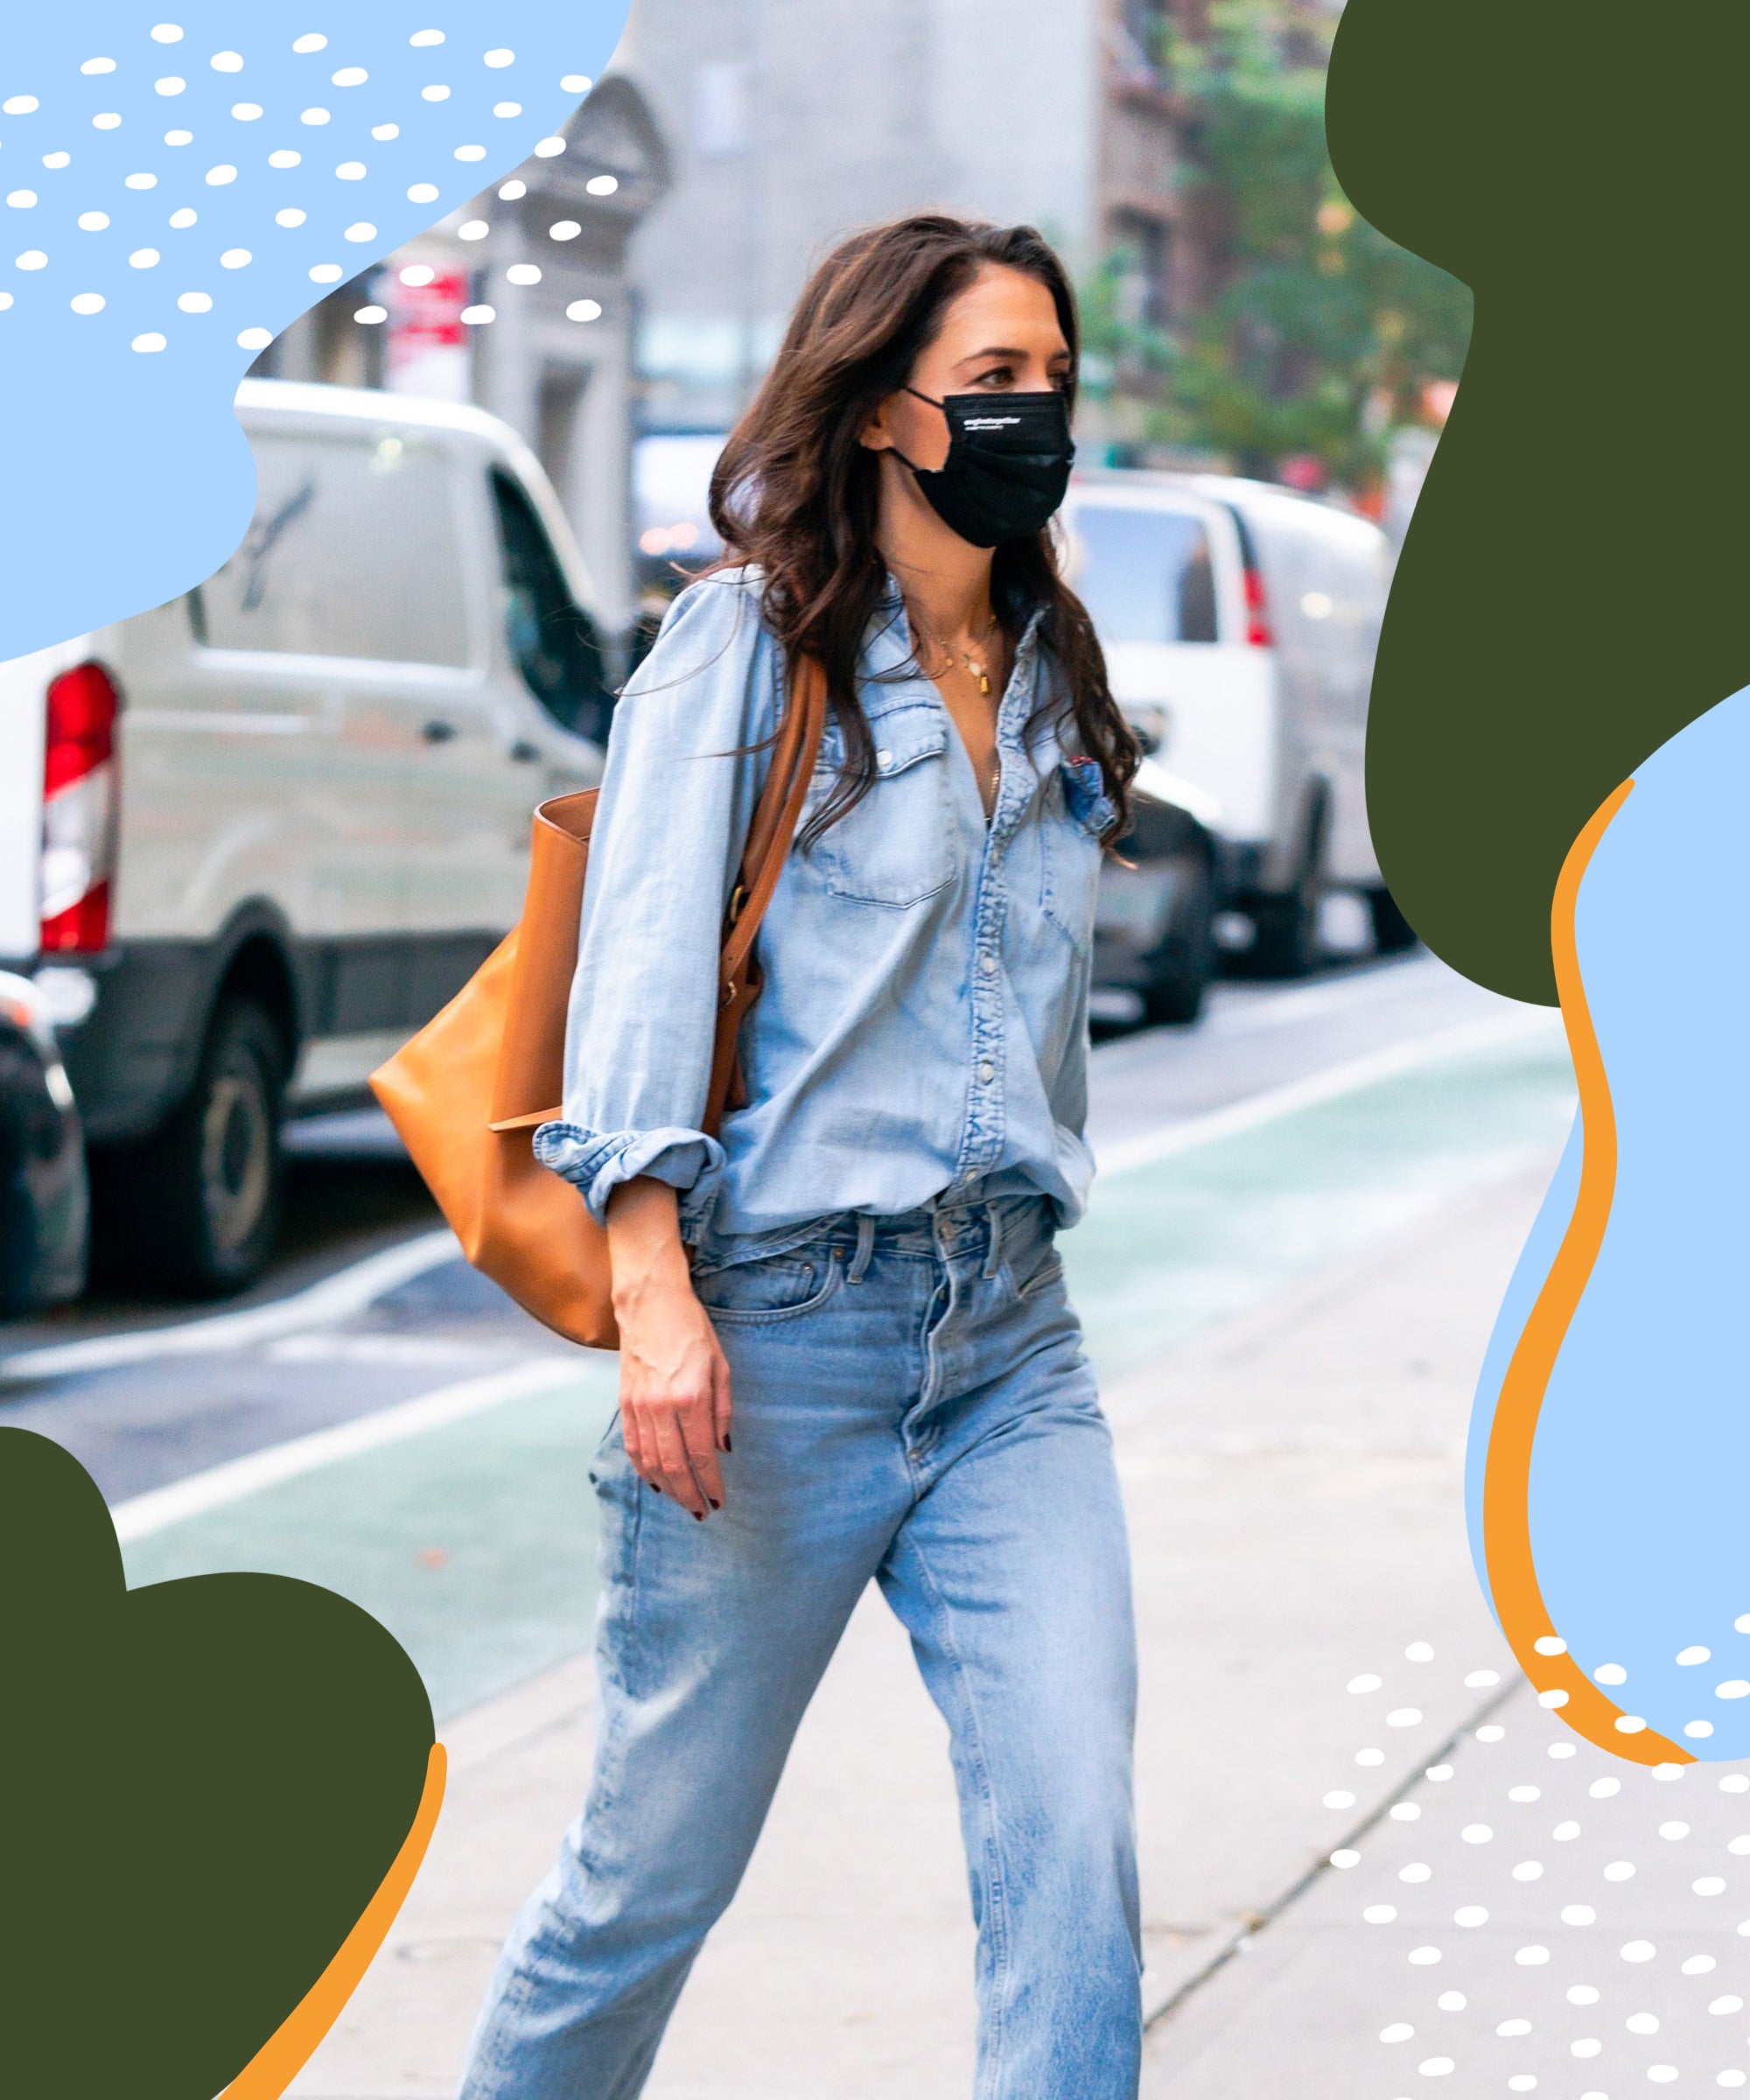 If youve mastered double denim go for a triple with a chambray top  40  DenimonDenim Outfit Ideas For Summer  Plus Affordable Denim Starting at  27  POPSUGAR Fashion Photo 22